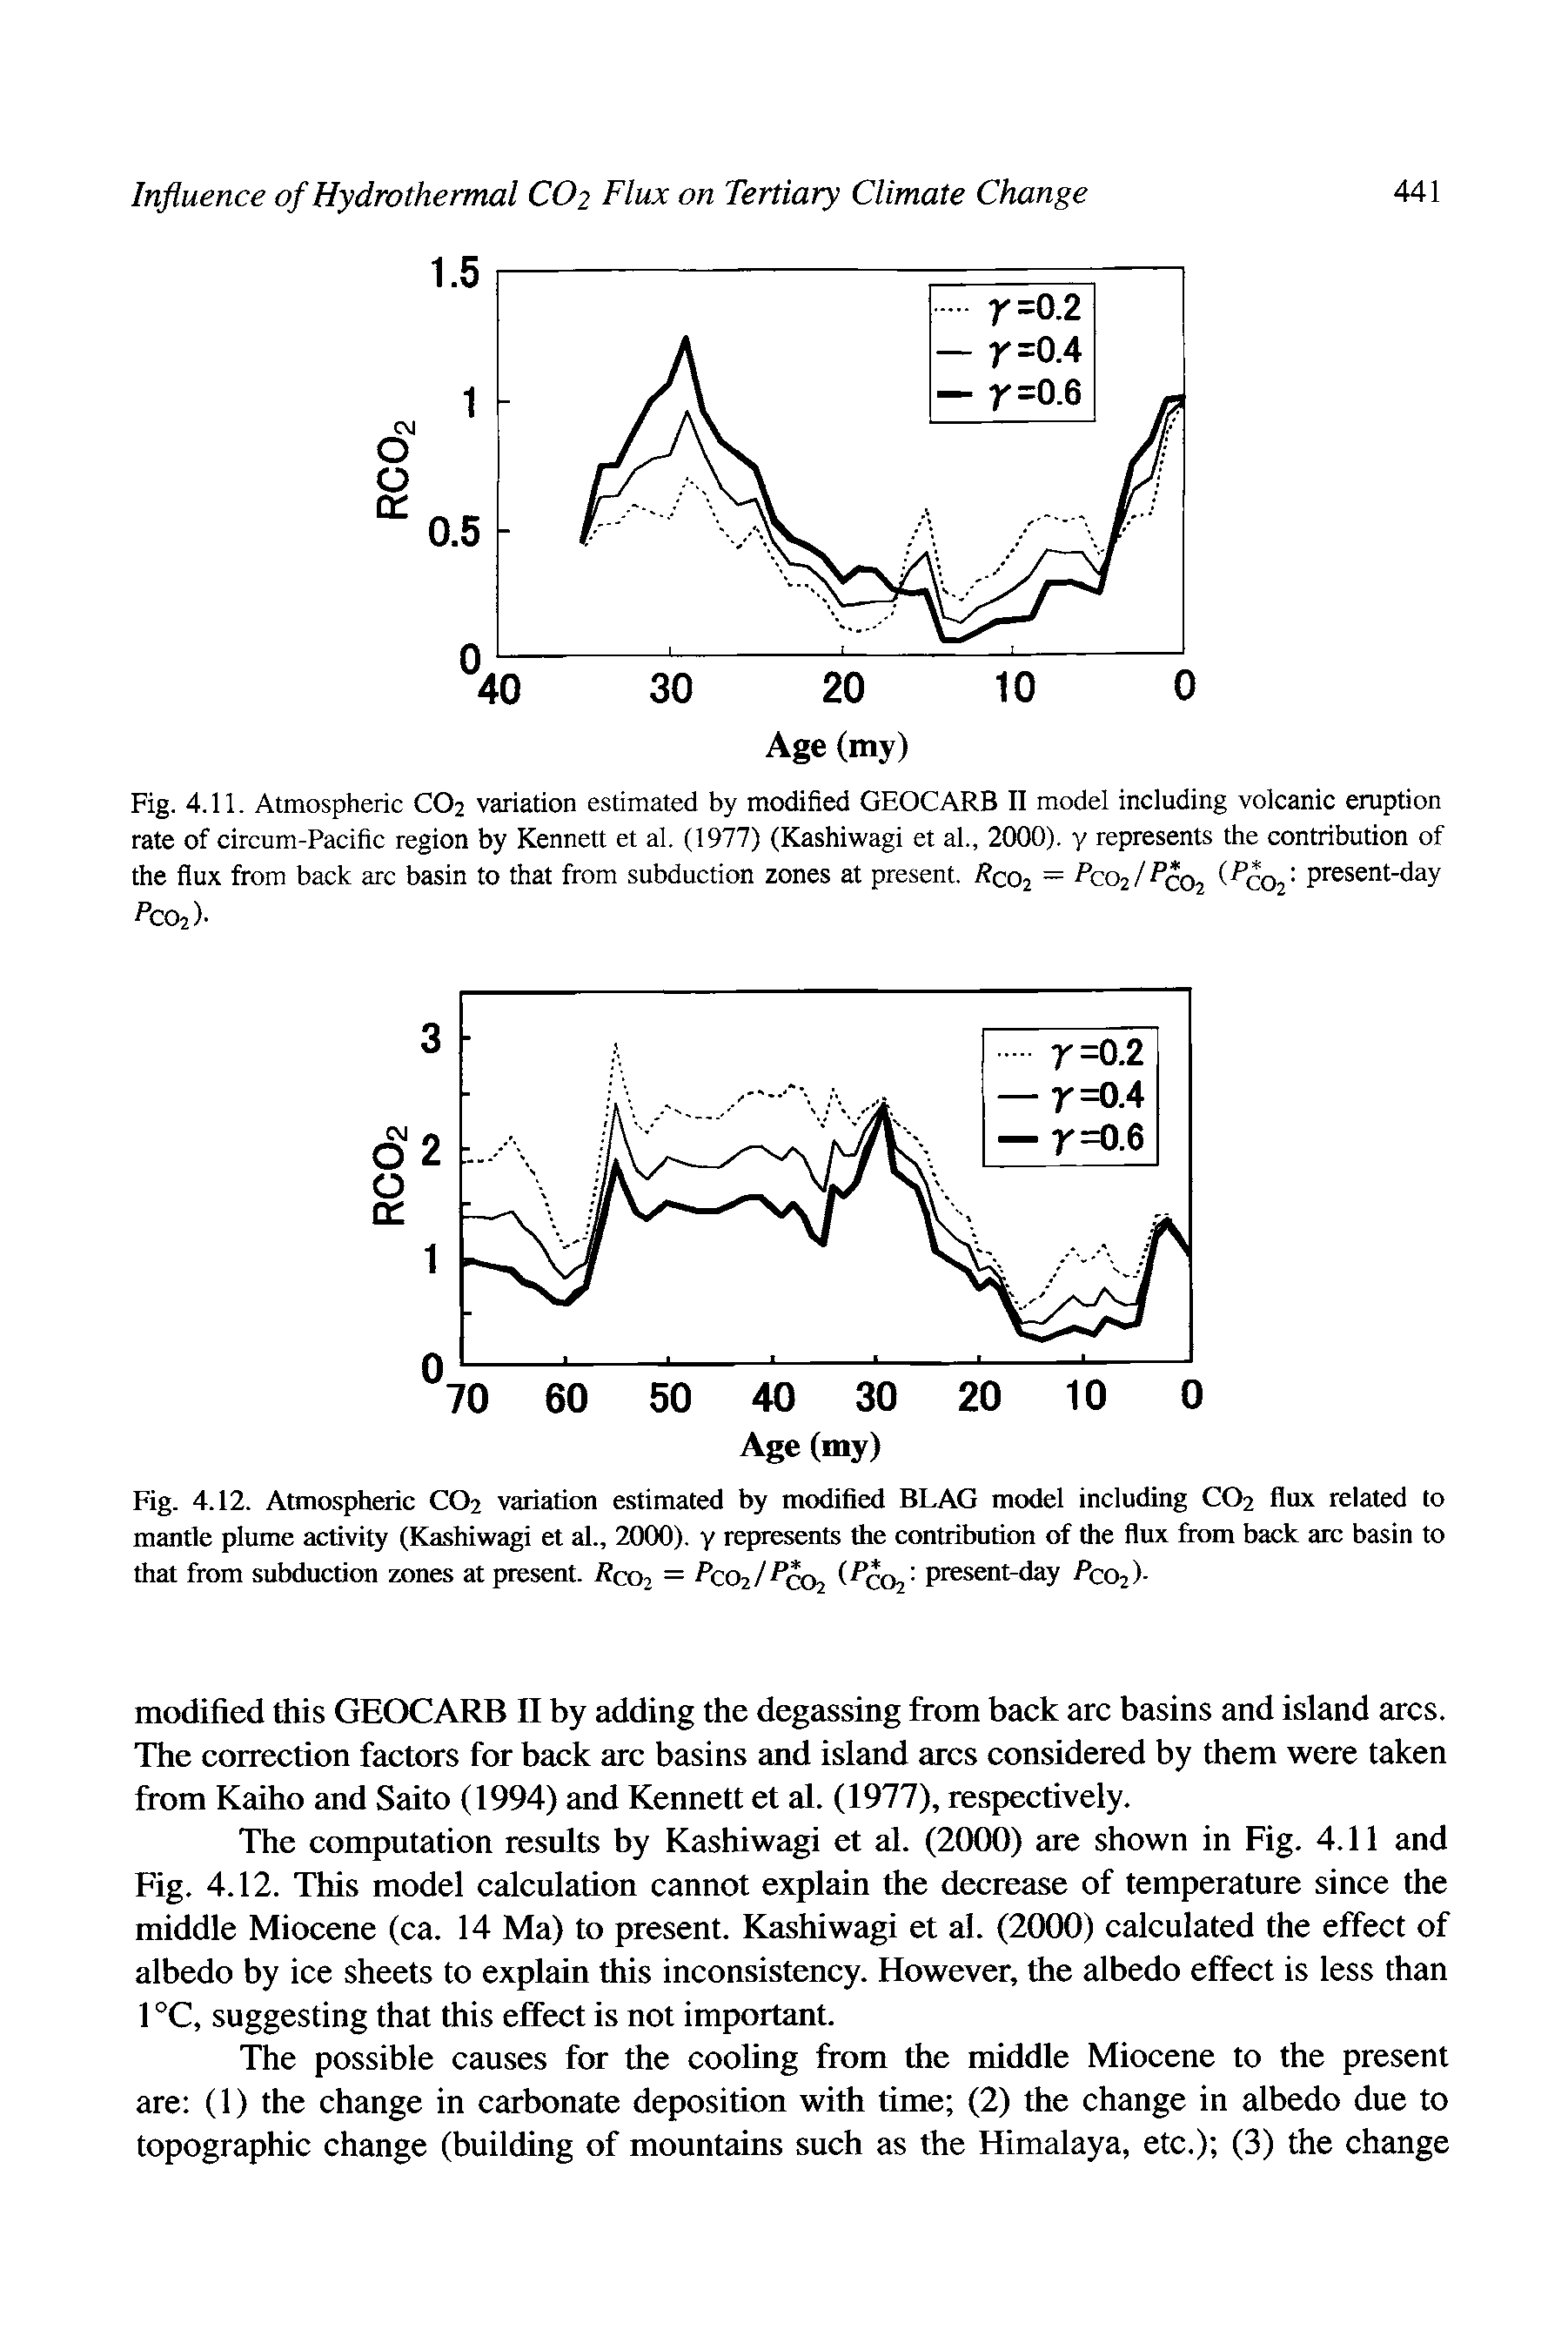 Fig. 4.11. Atmospheric CO2 variation estimated by modified GEOCARB II model including volcanic eruption rate of circum-Pacific region by Kennett et al. (1977) (Kashiwagi et al., 2000). y represents the contribution of the flux from back arc basin to that from subduction zones at present. Rco = PcOi/PcOi 02 Pfesent-day PC02)-...